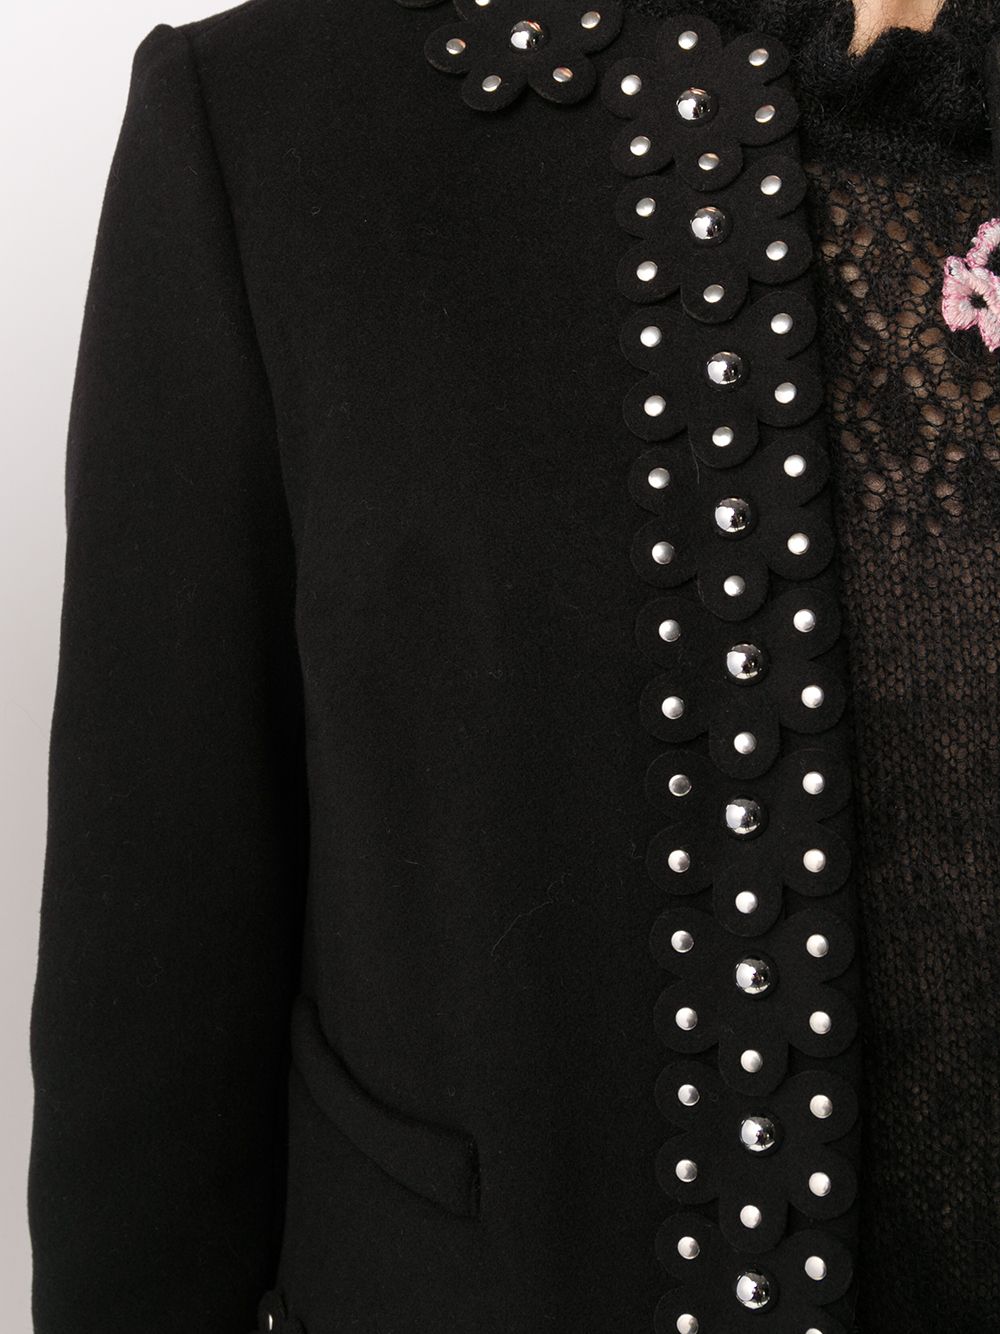 RED Valentino Studded Floral Cropped Jacket - Farfetch